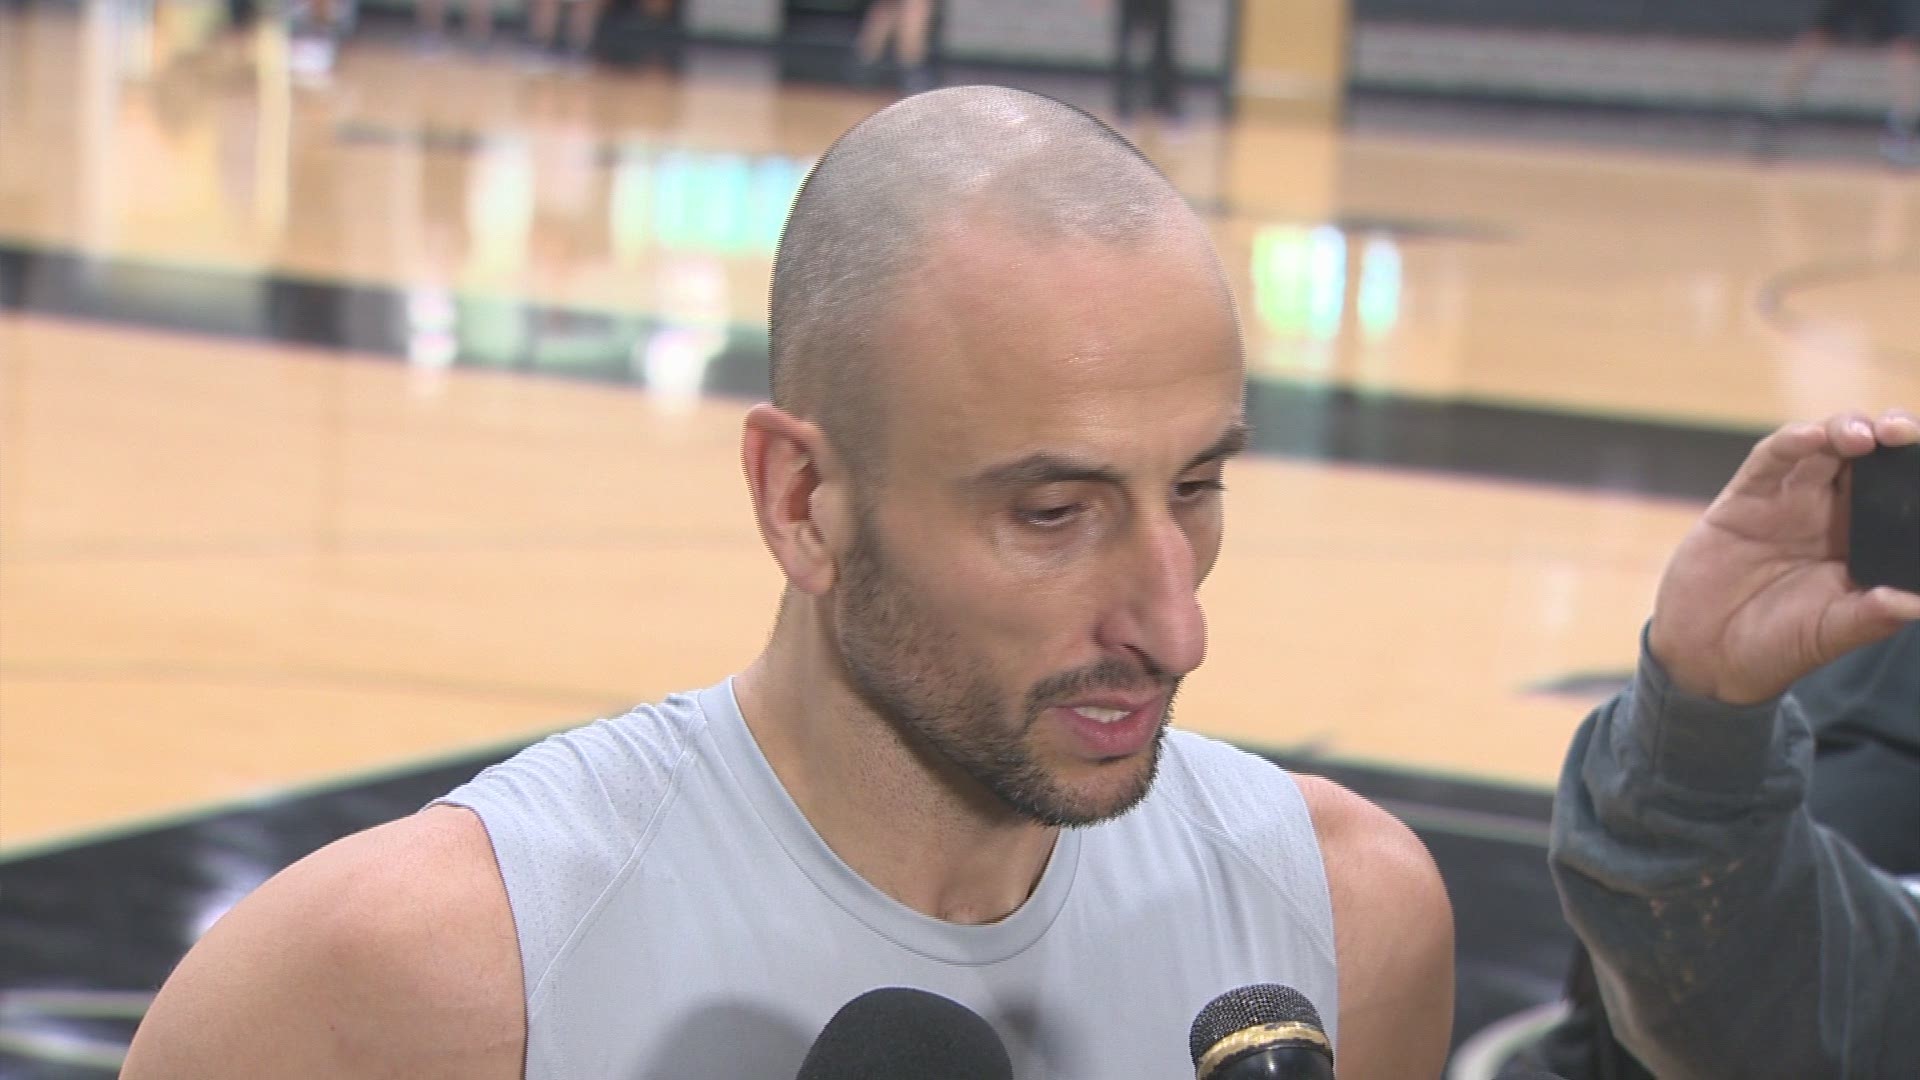 Spurs guard Manu Ginobili speaks to the media after the Spurs shootaround on Thursday, April 19.